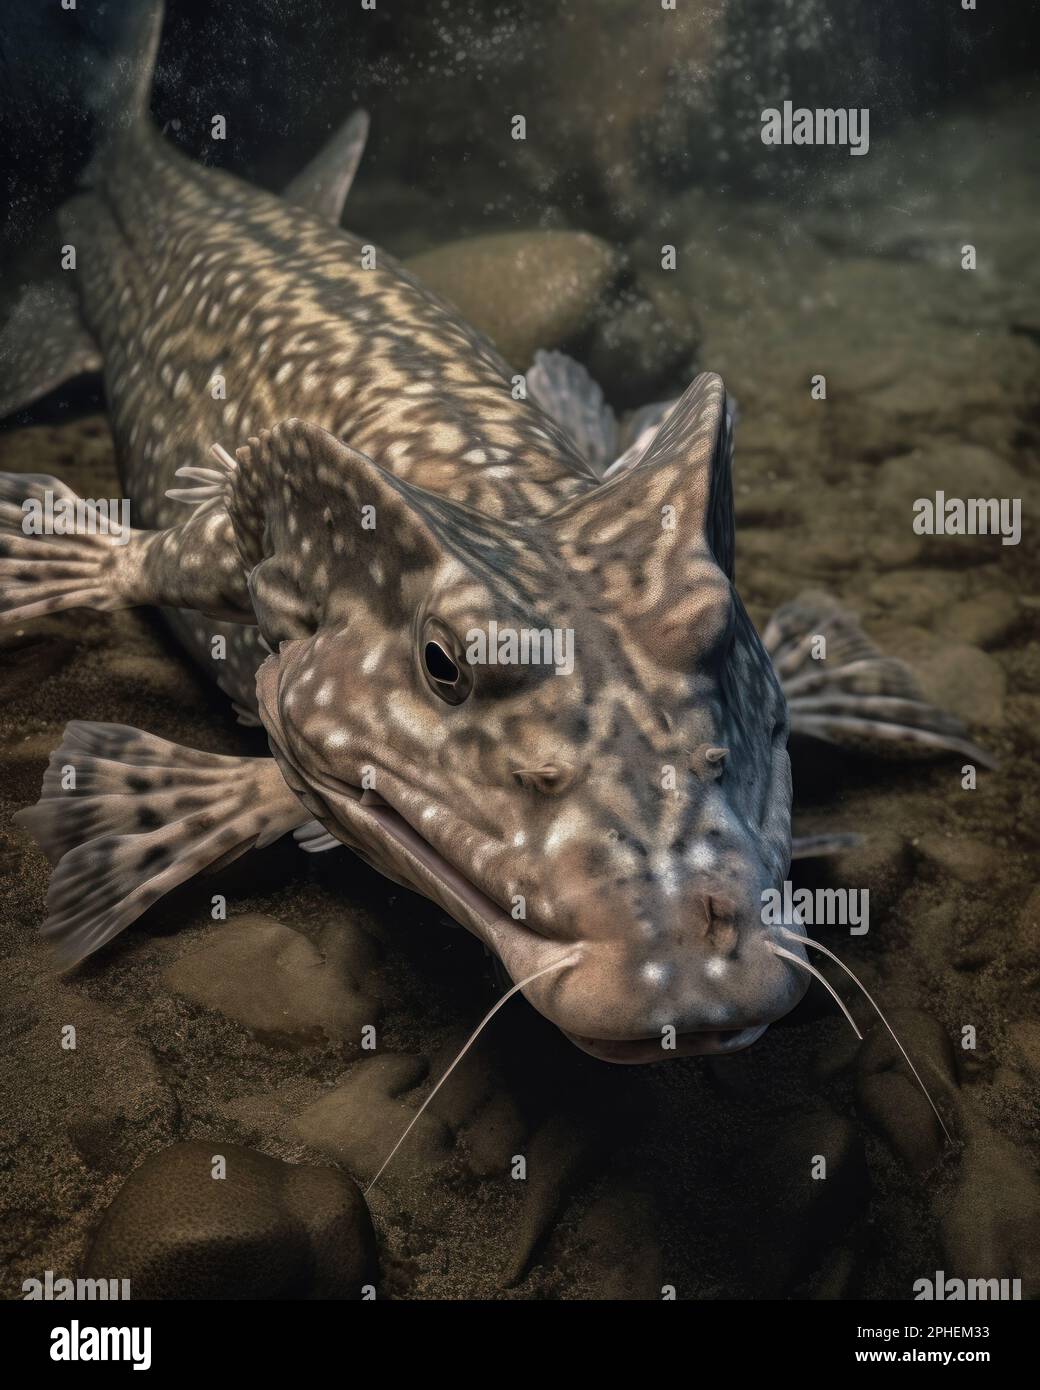 Enigmatic Goonch Catfish: Lurking in the Himalayan River Depths Stock Photo